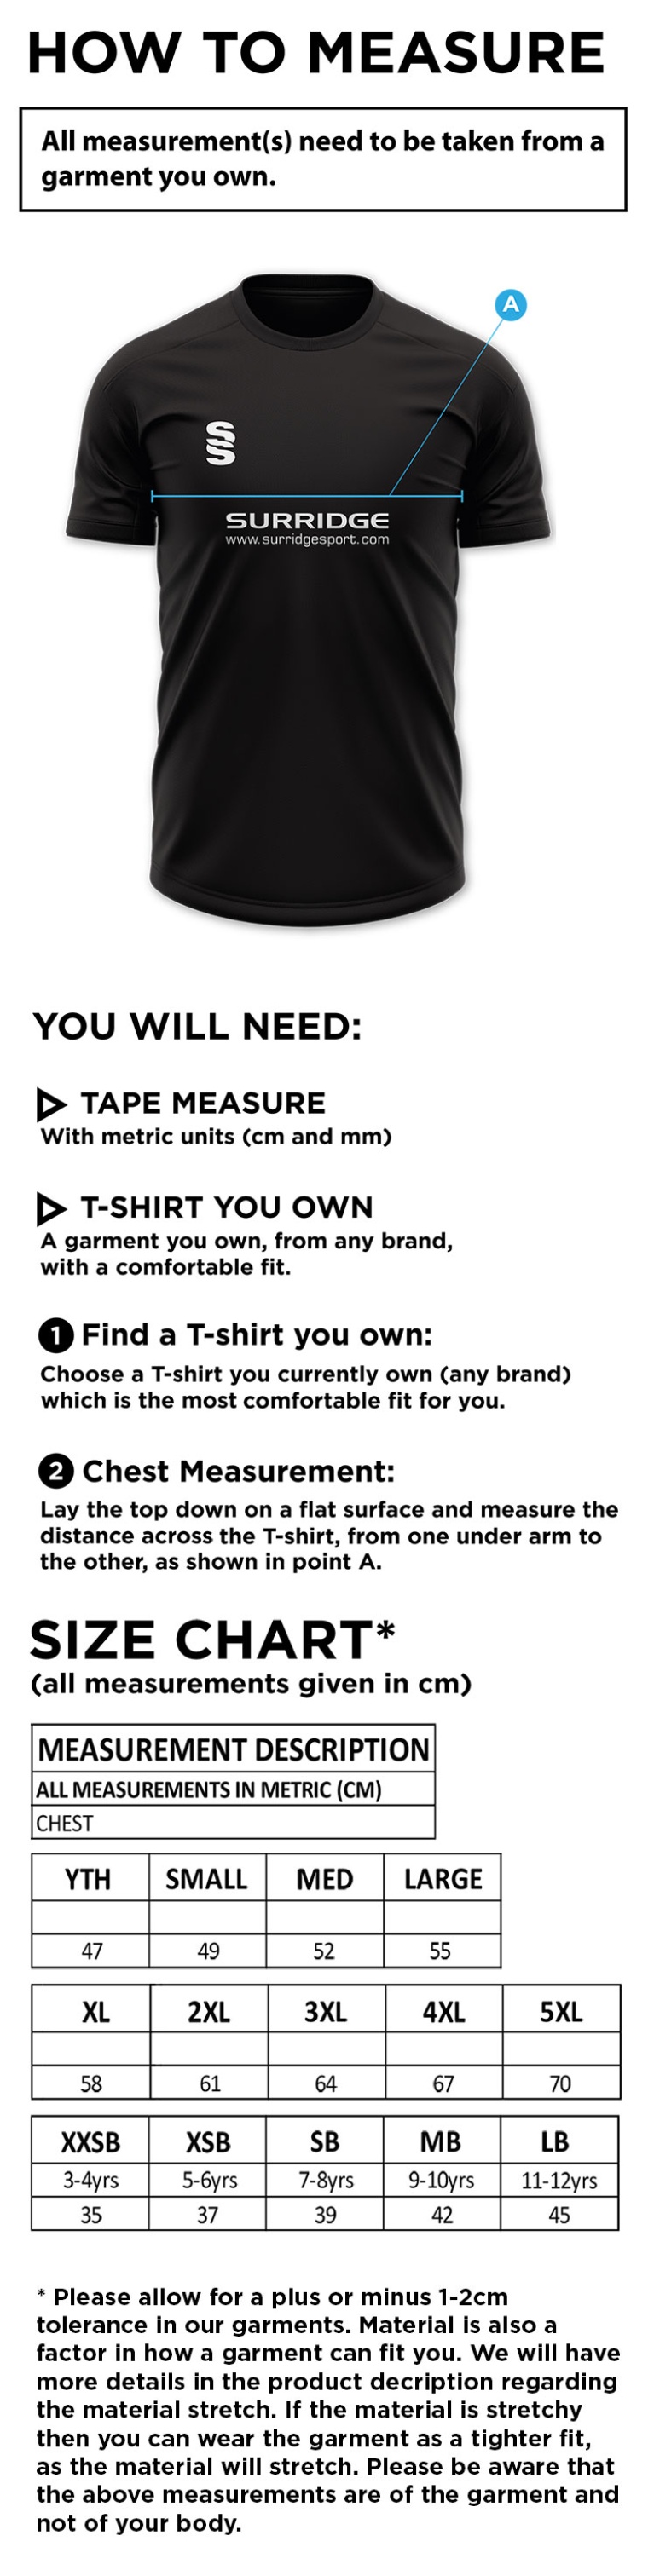 Youth's Dual Games Shirt : Emerald - Size Guide